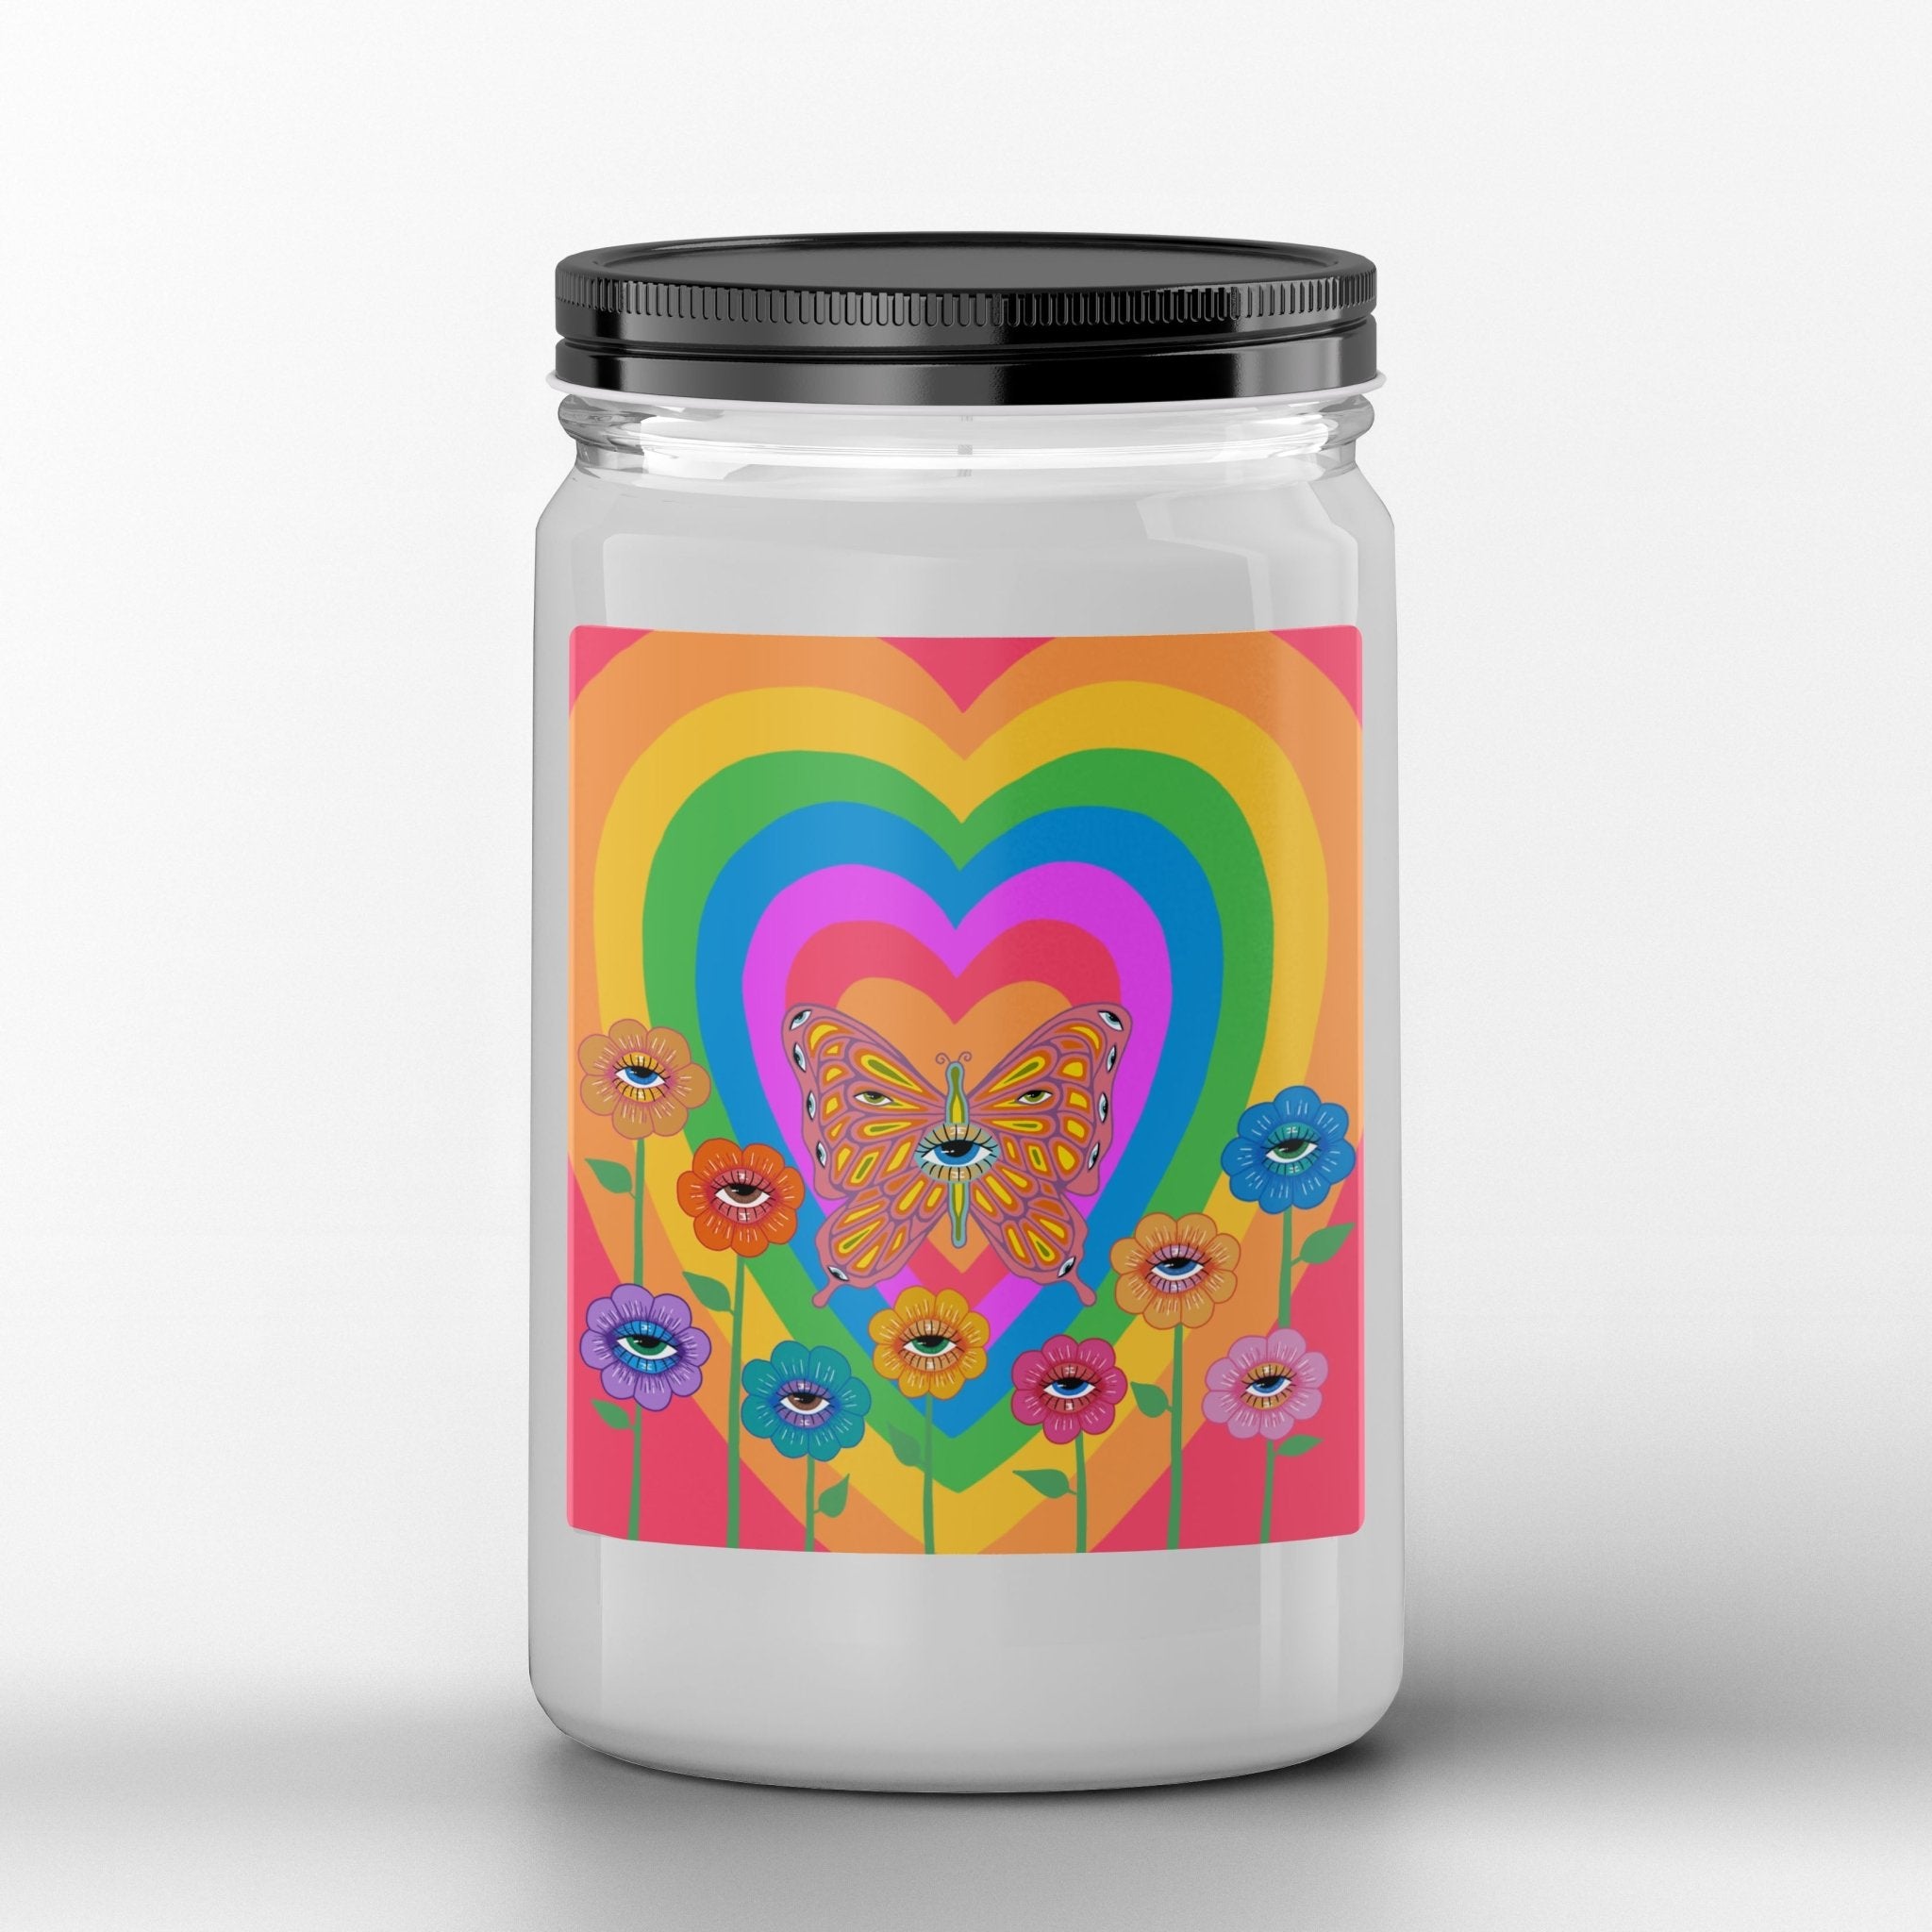 Vivillus Scented Candle in Mason Jar: Eye Butterfly - Candlefy